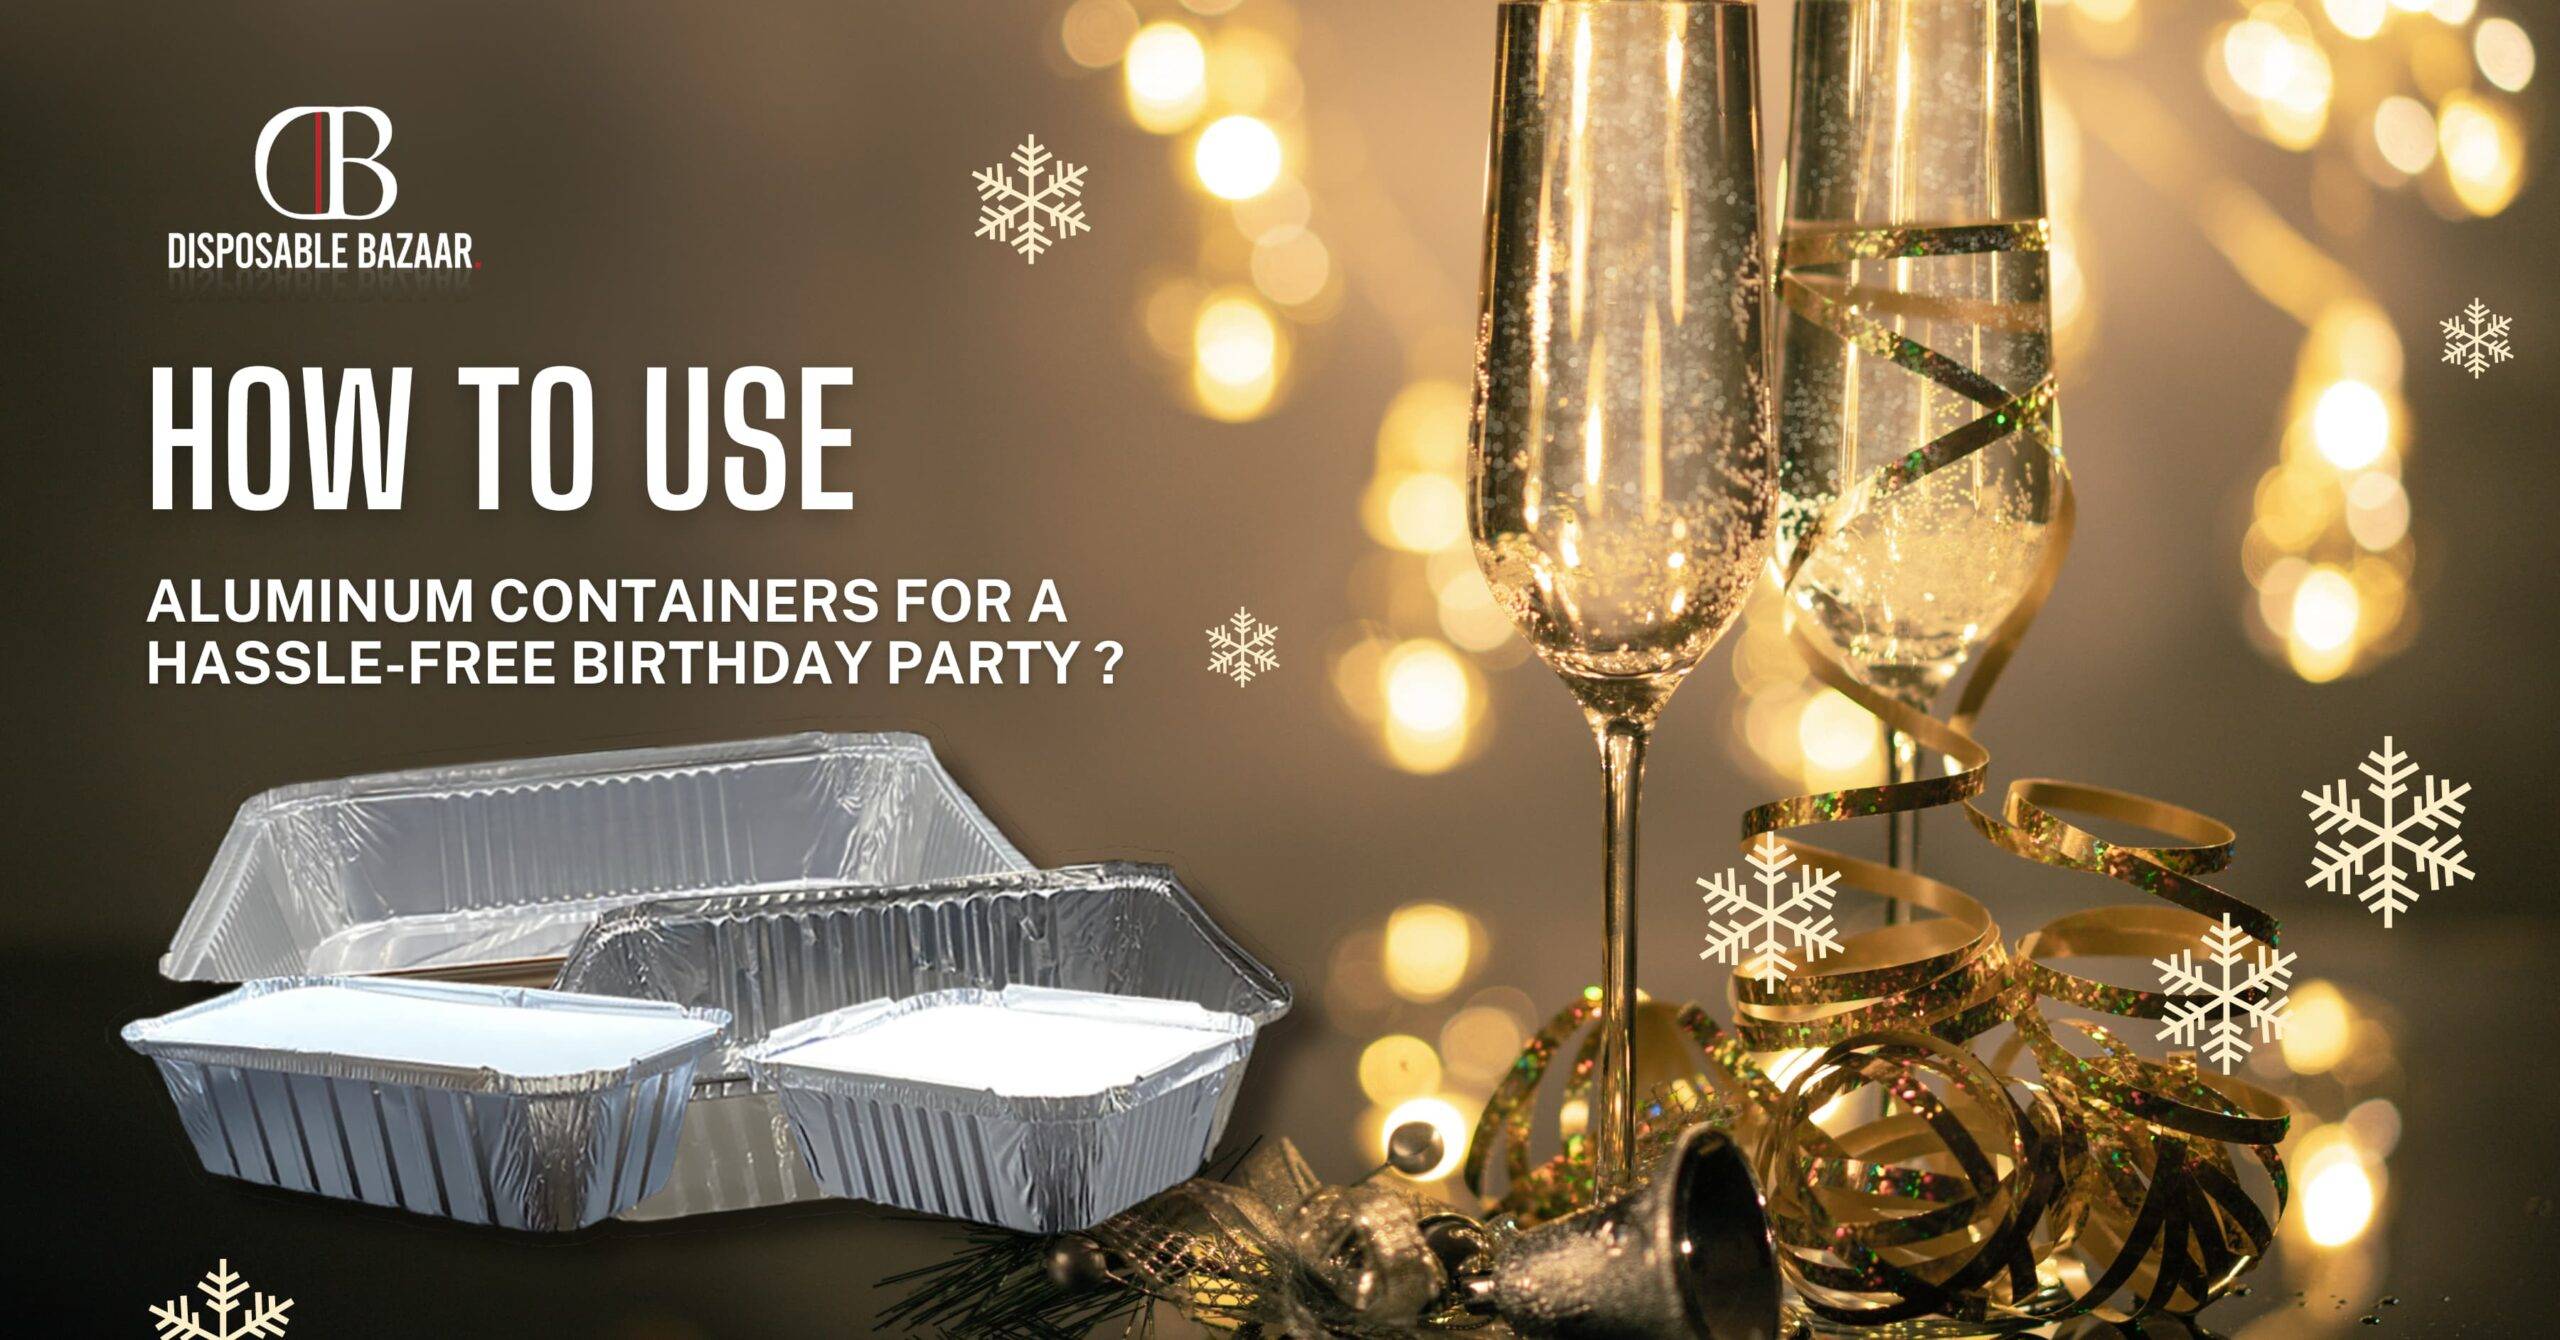 How to Use Aluminum Containers for a Hassle-Free Birthday Party?